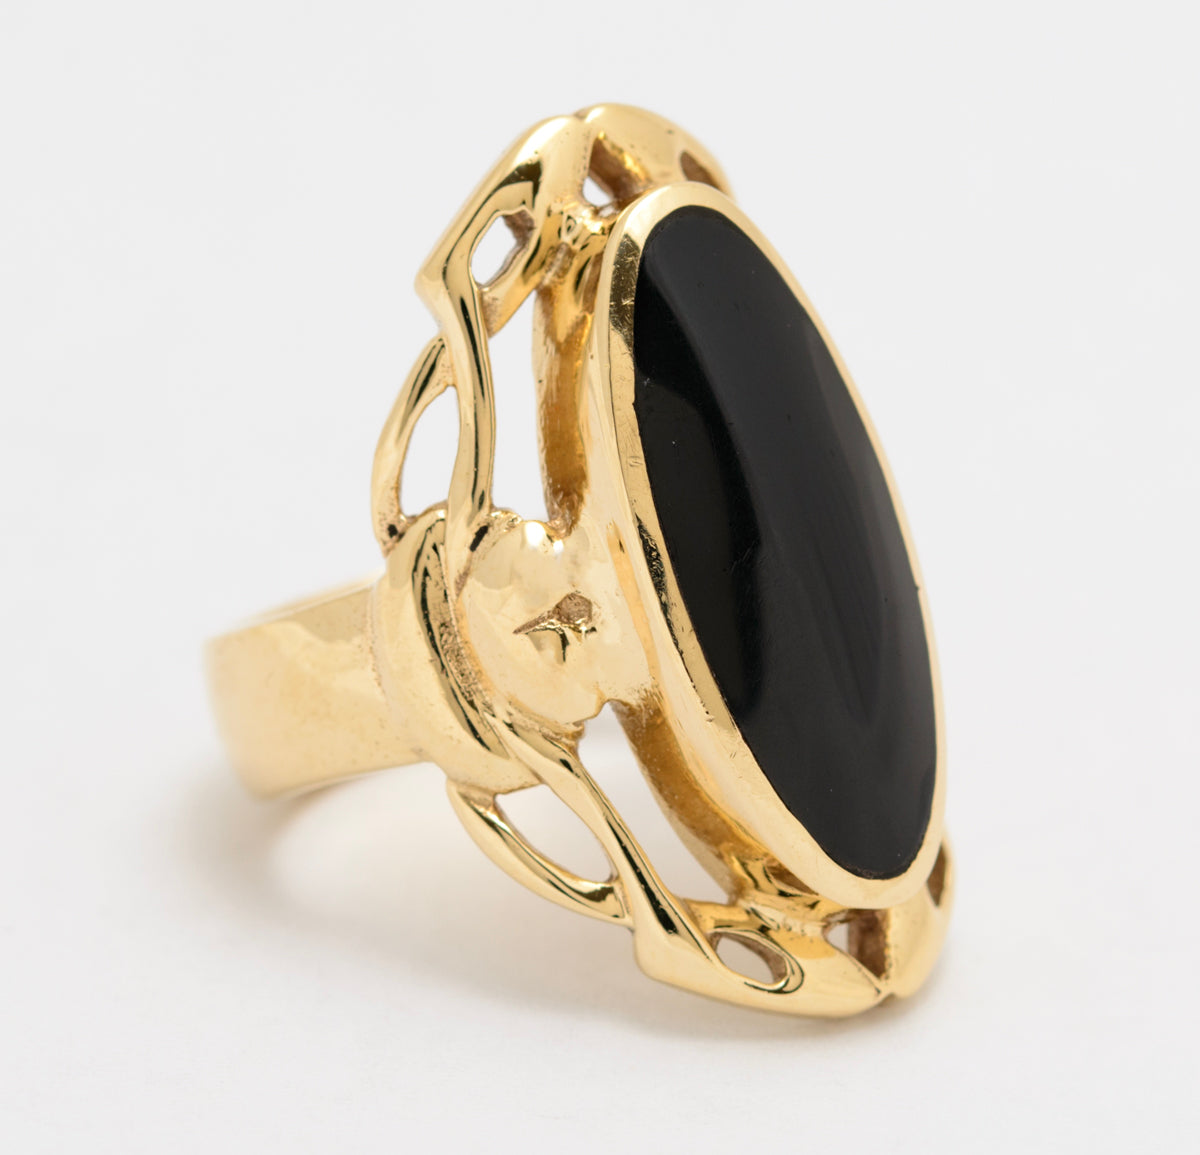 Whitby Jet 9ct Gold Chunky Stylish Gothic Ring by C W Sellors UK Size L - Boxed (A1649)